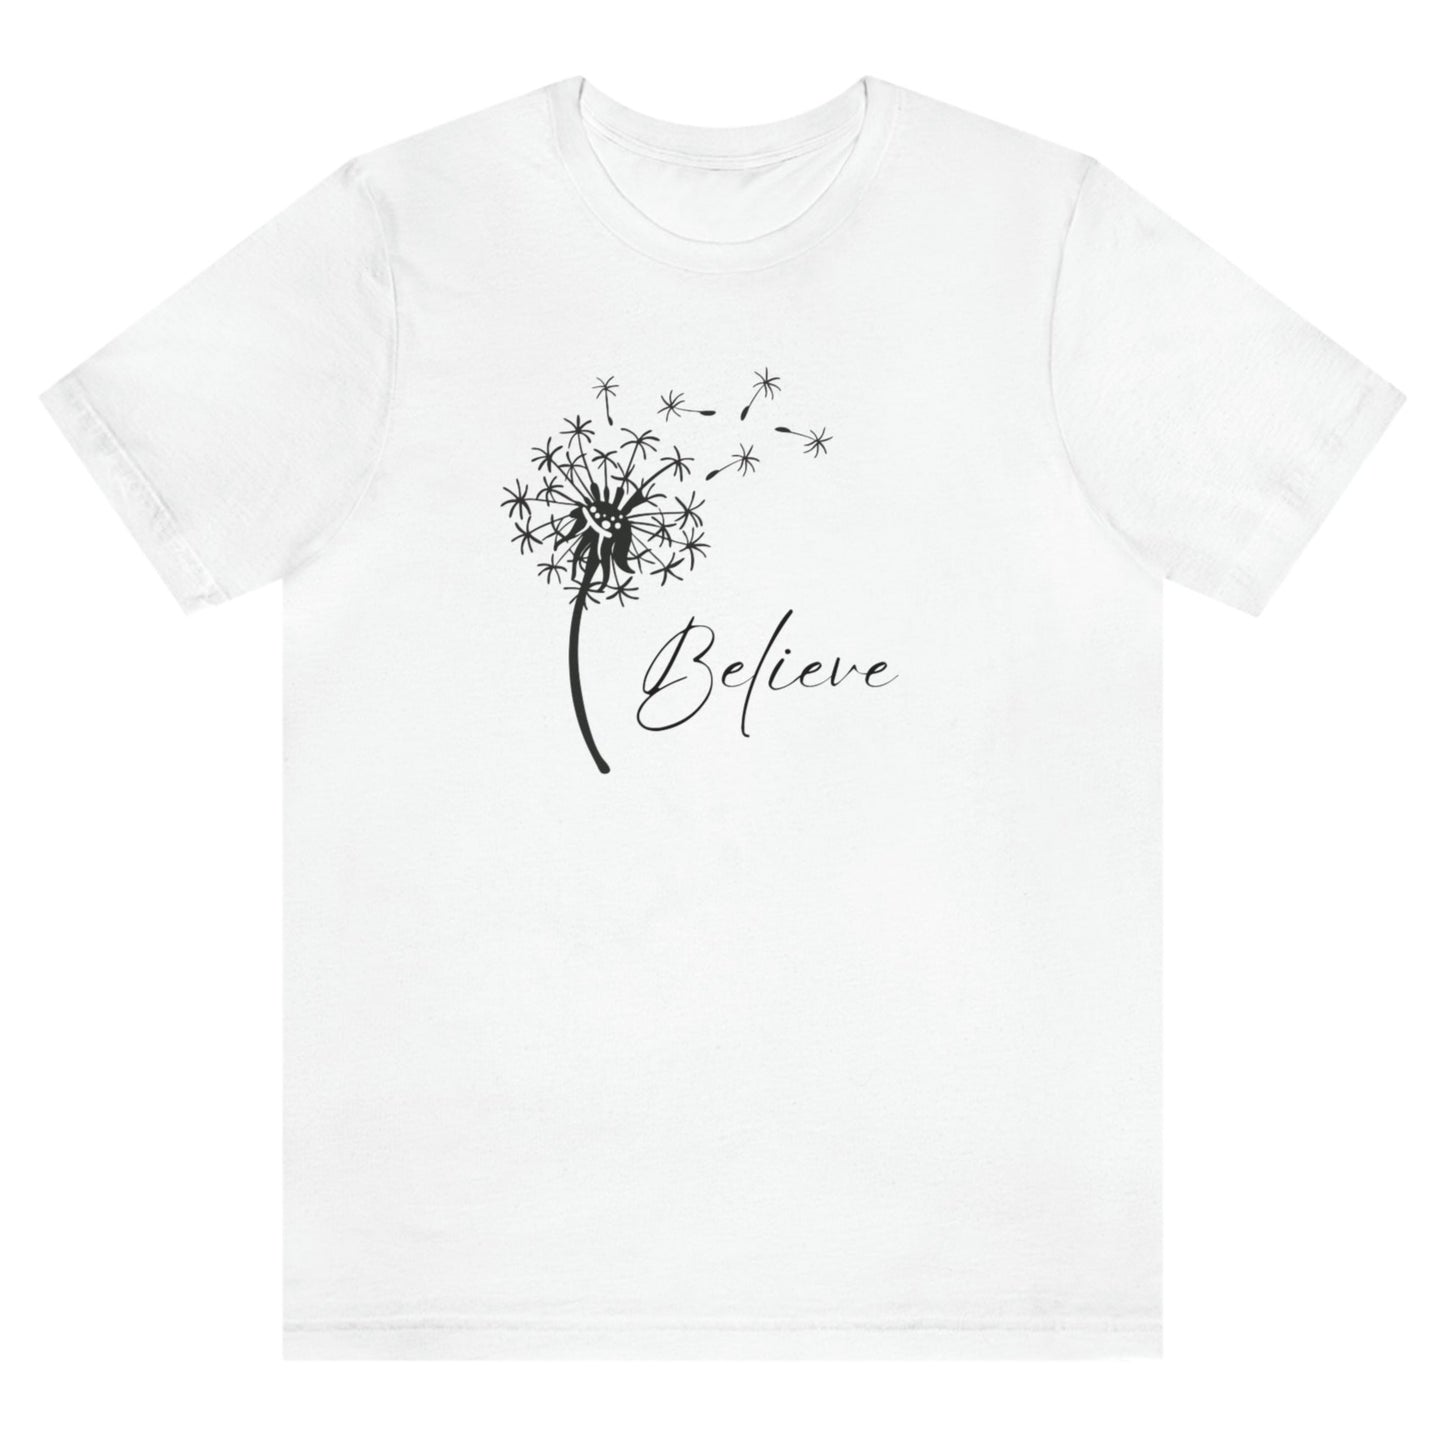 believe-with-dandelion-wishes-white-t-shirt-womens-inspiring